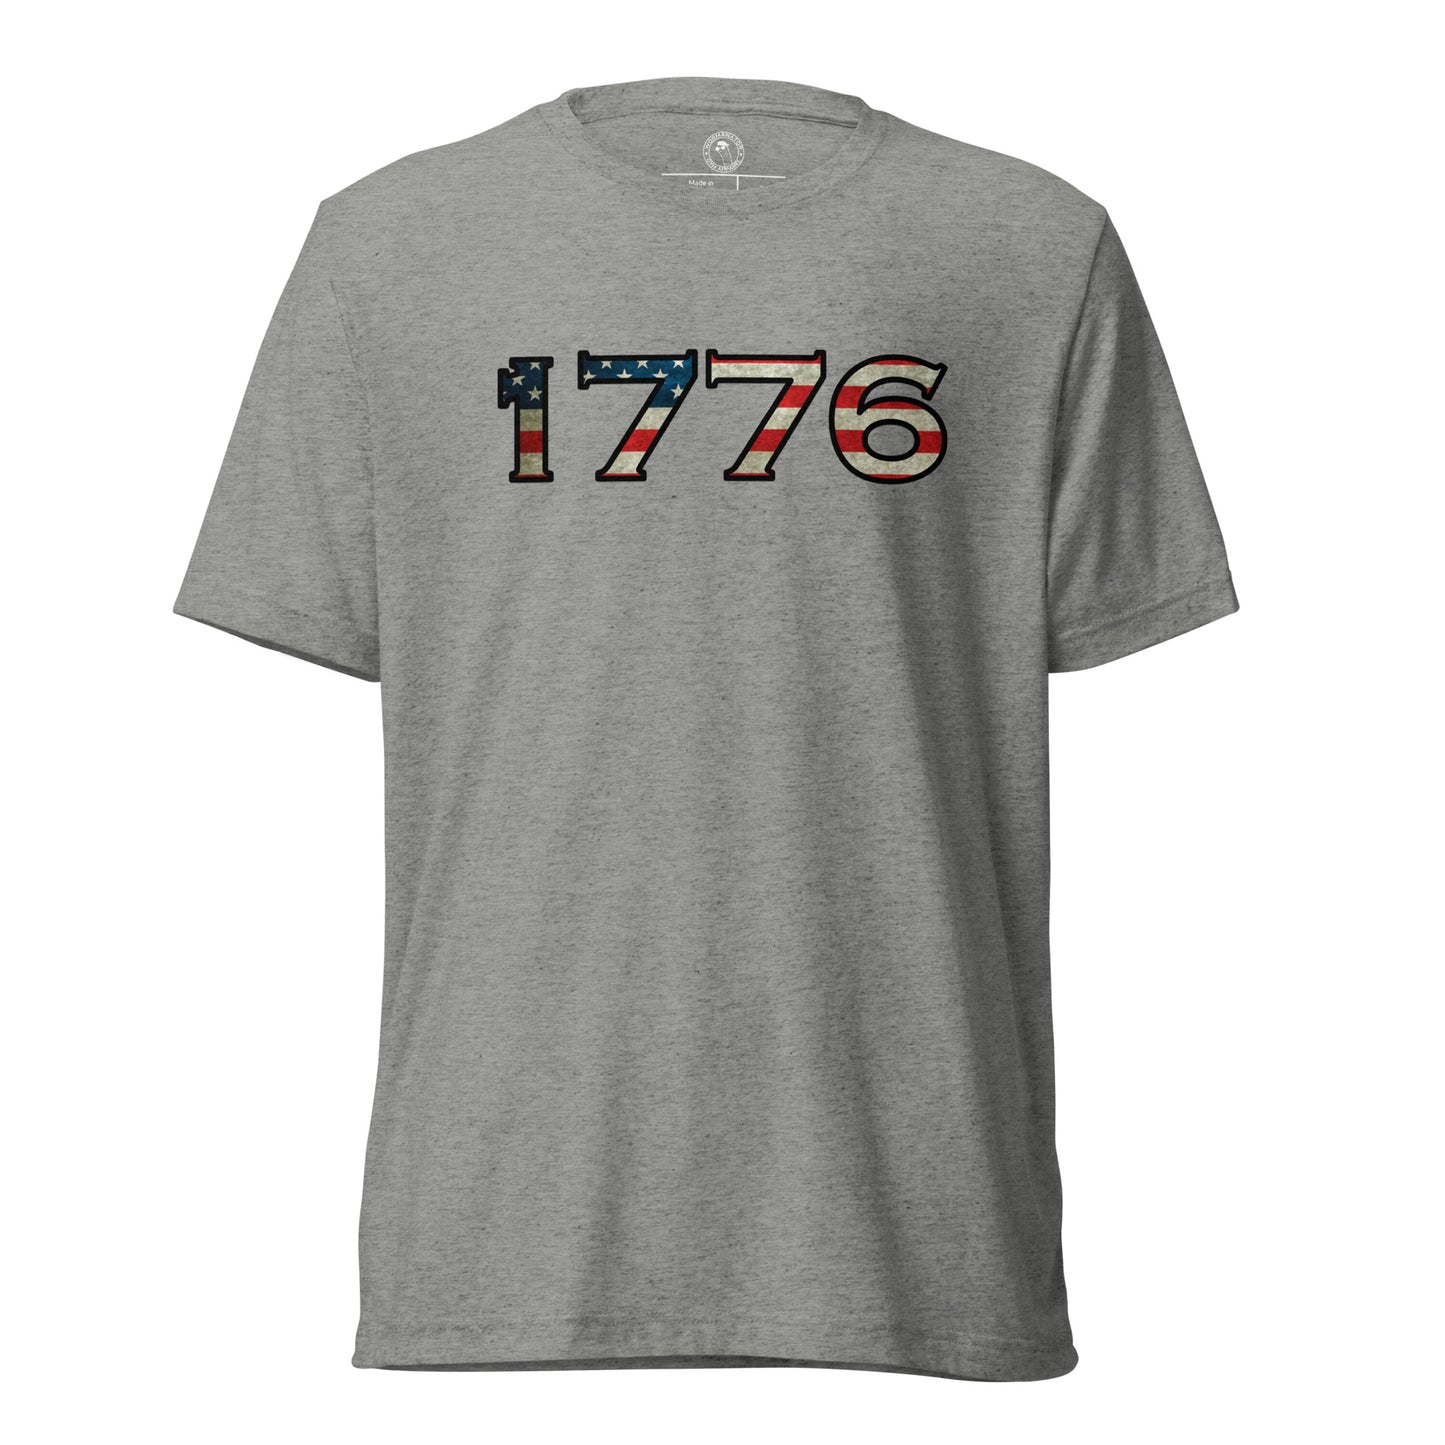 1776 T-Shirt in Athletic Grey Triblend